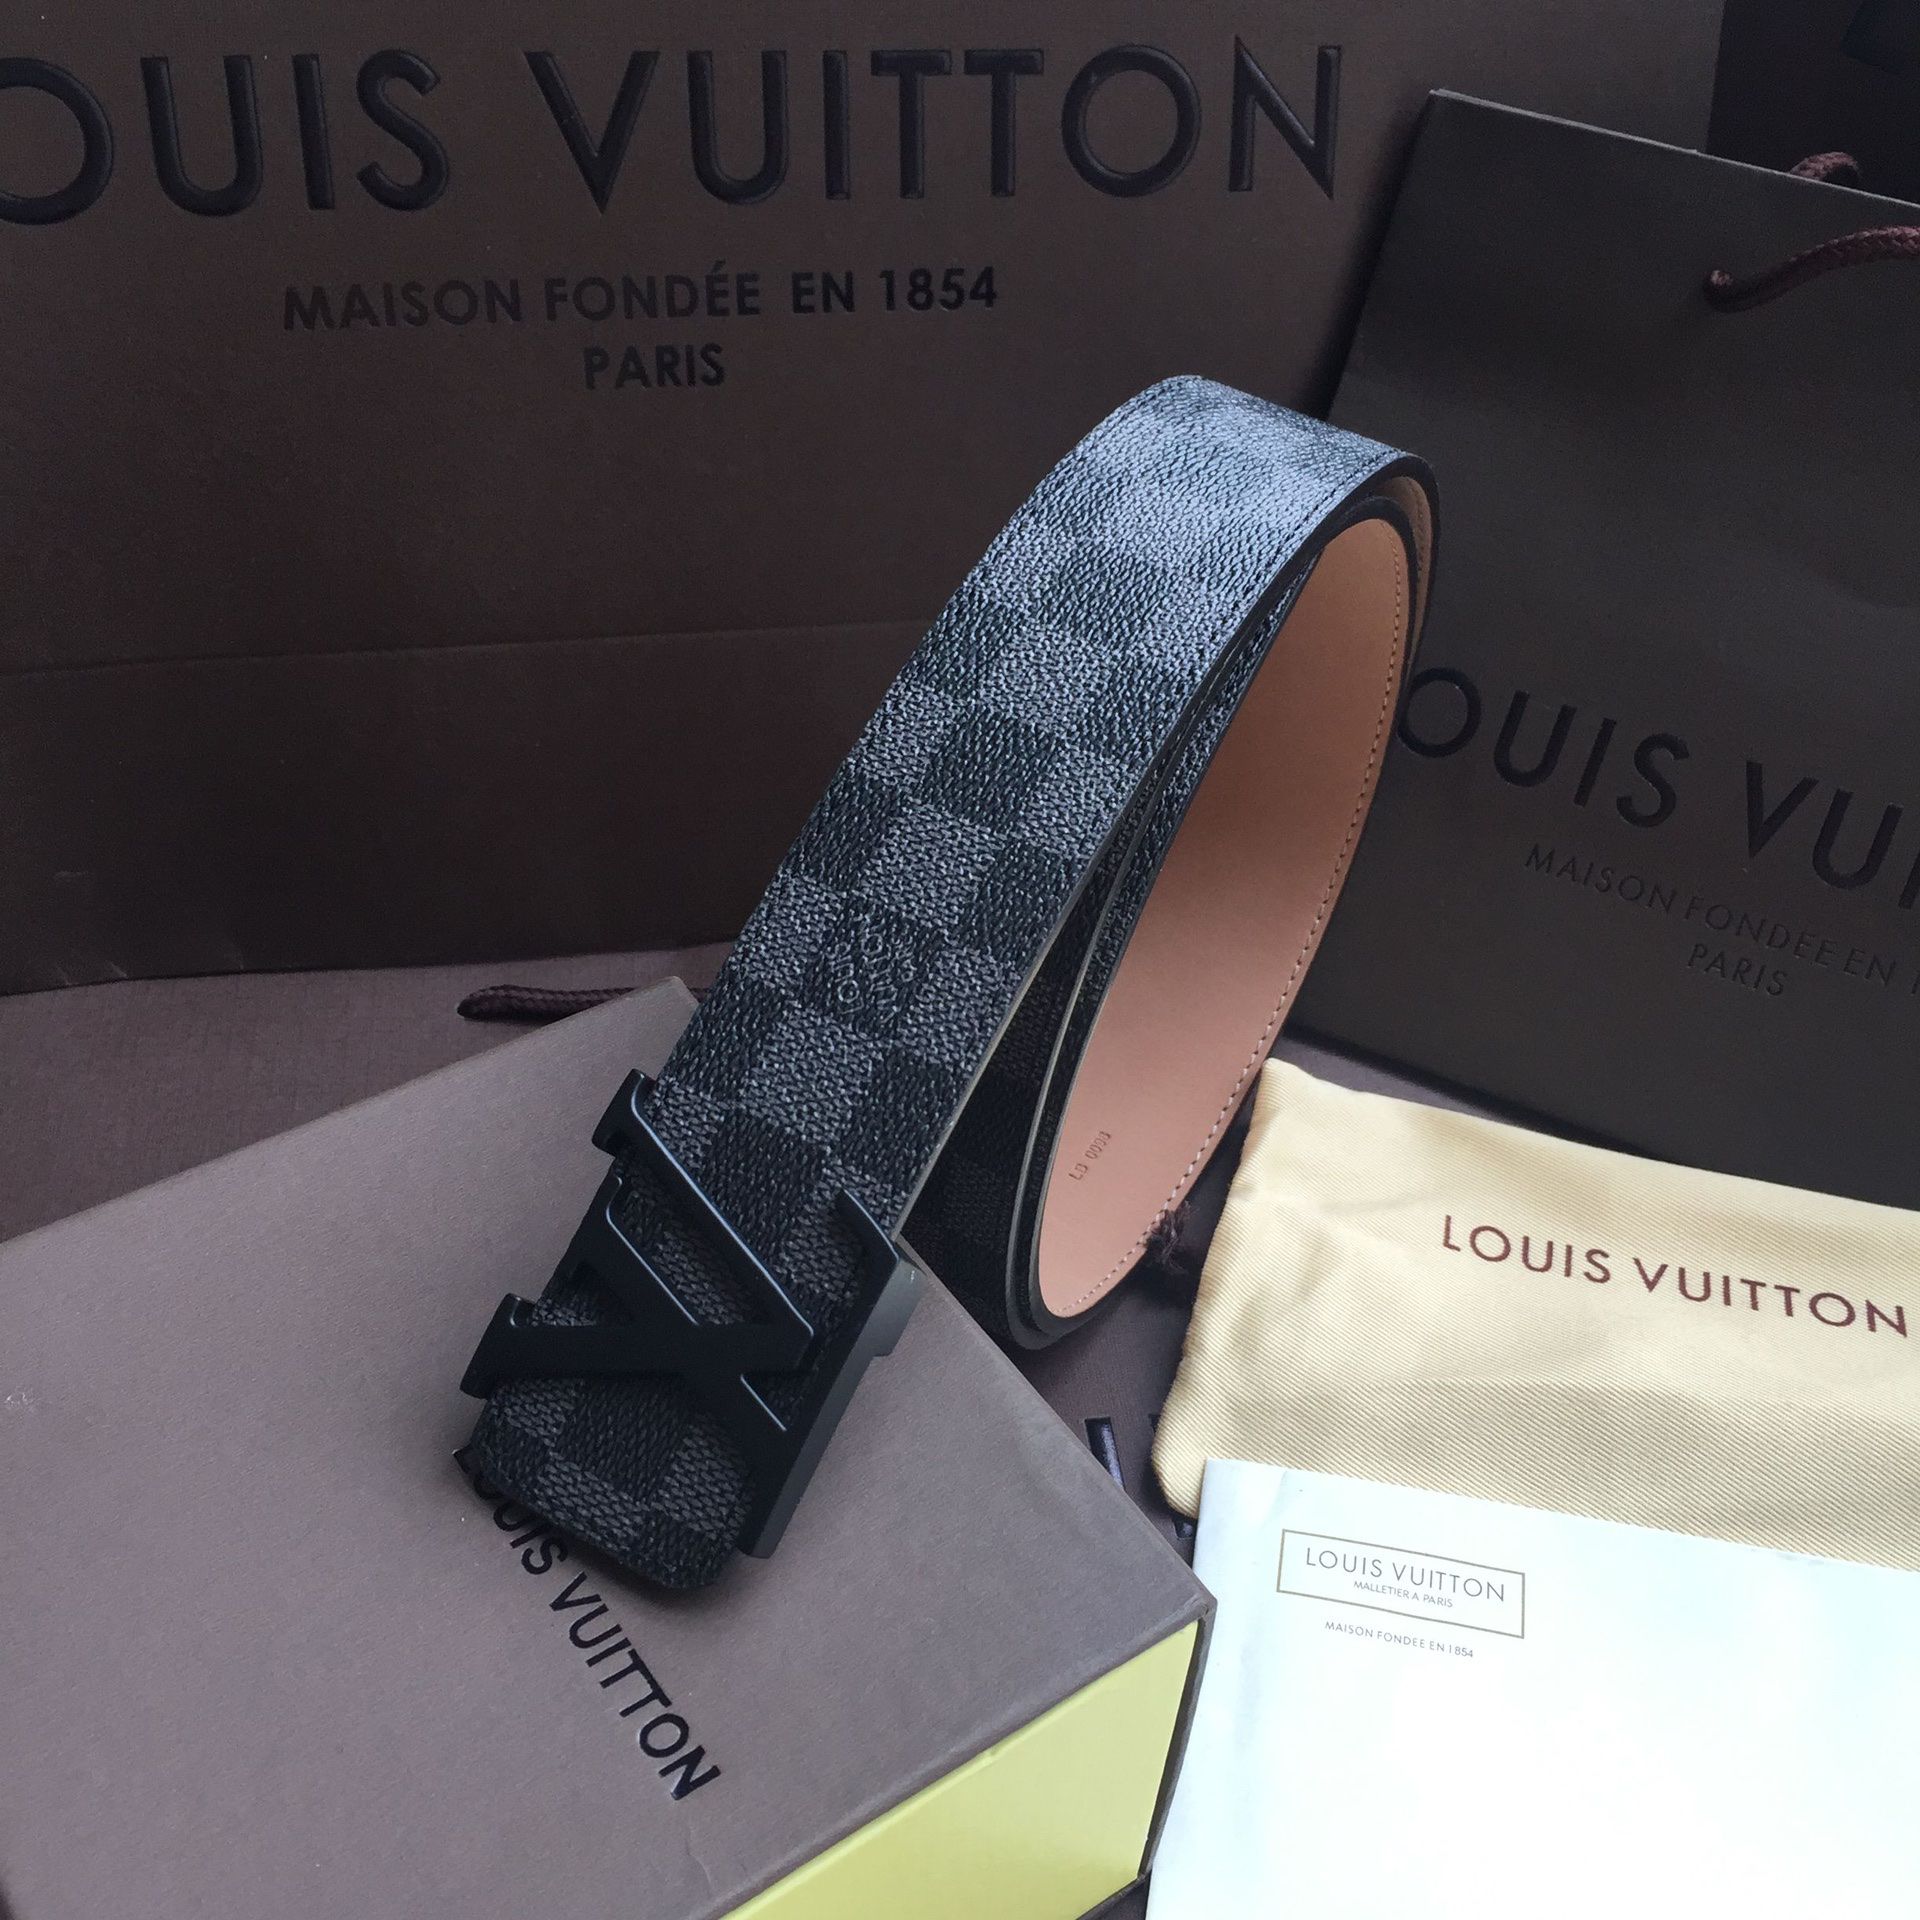 Used Louis Vuitton belt Waist Size 34-36 for Sale in The Bronx, NY - OfferUp